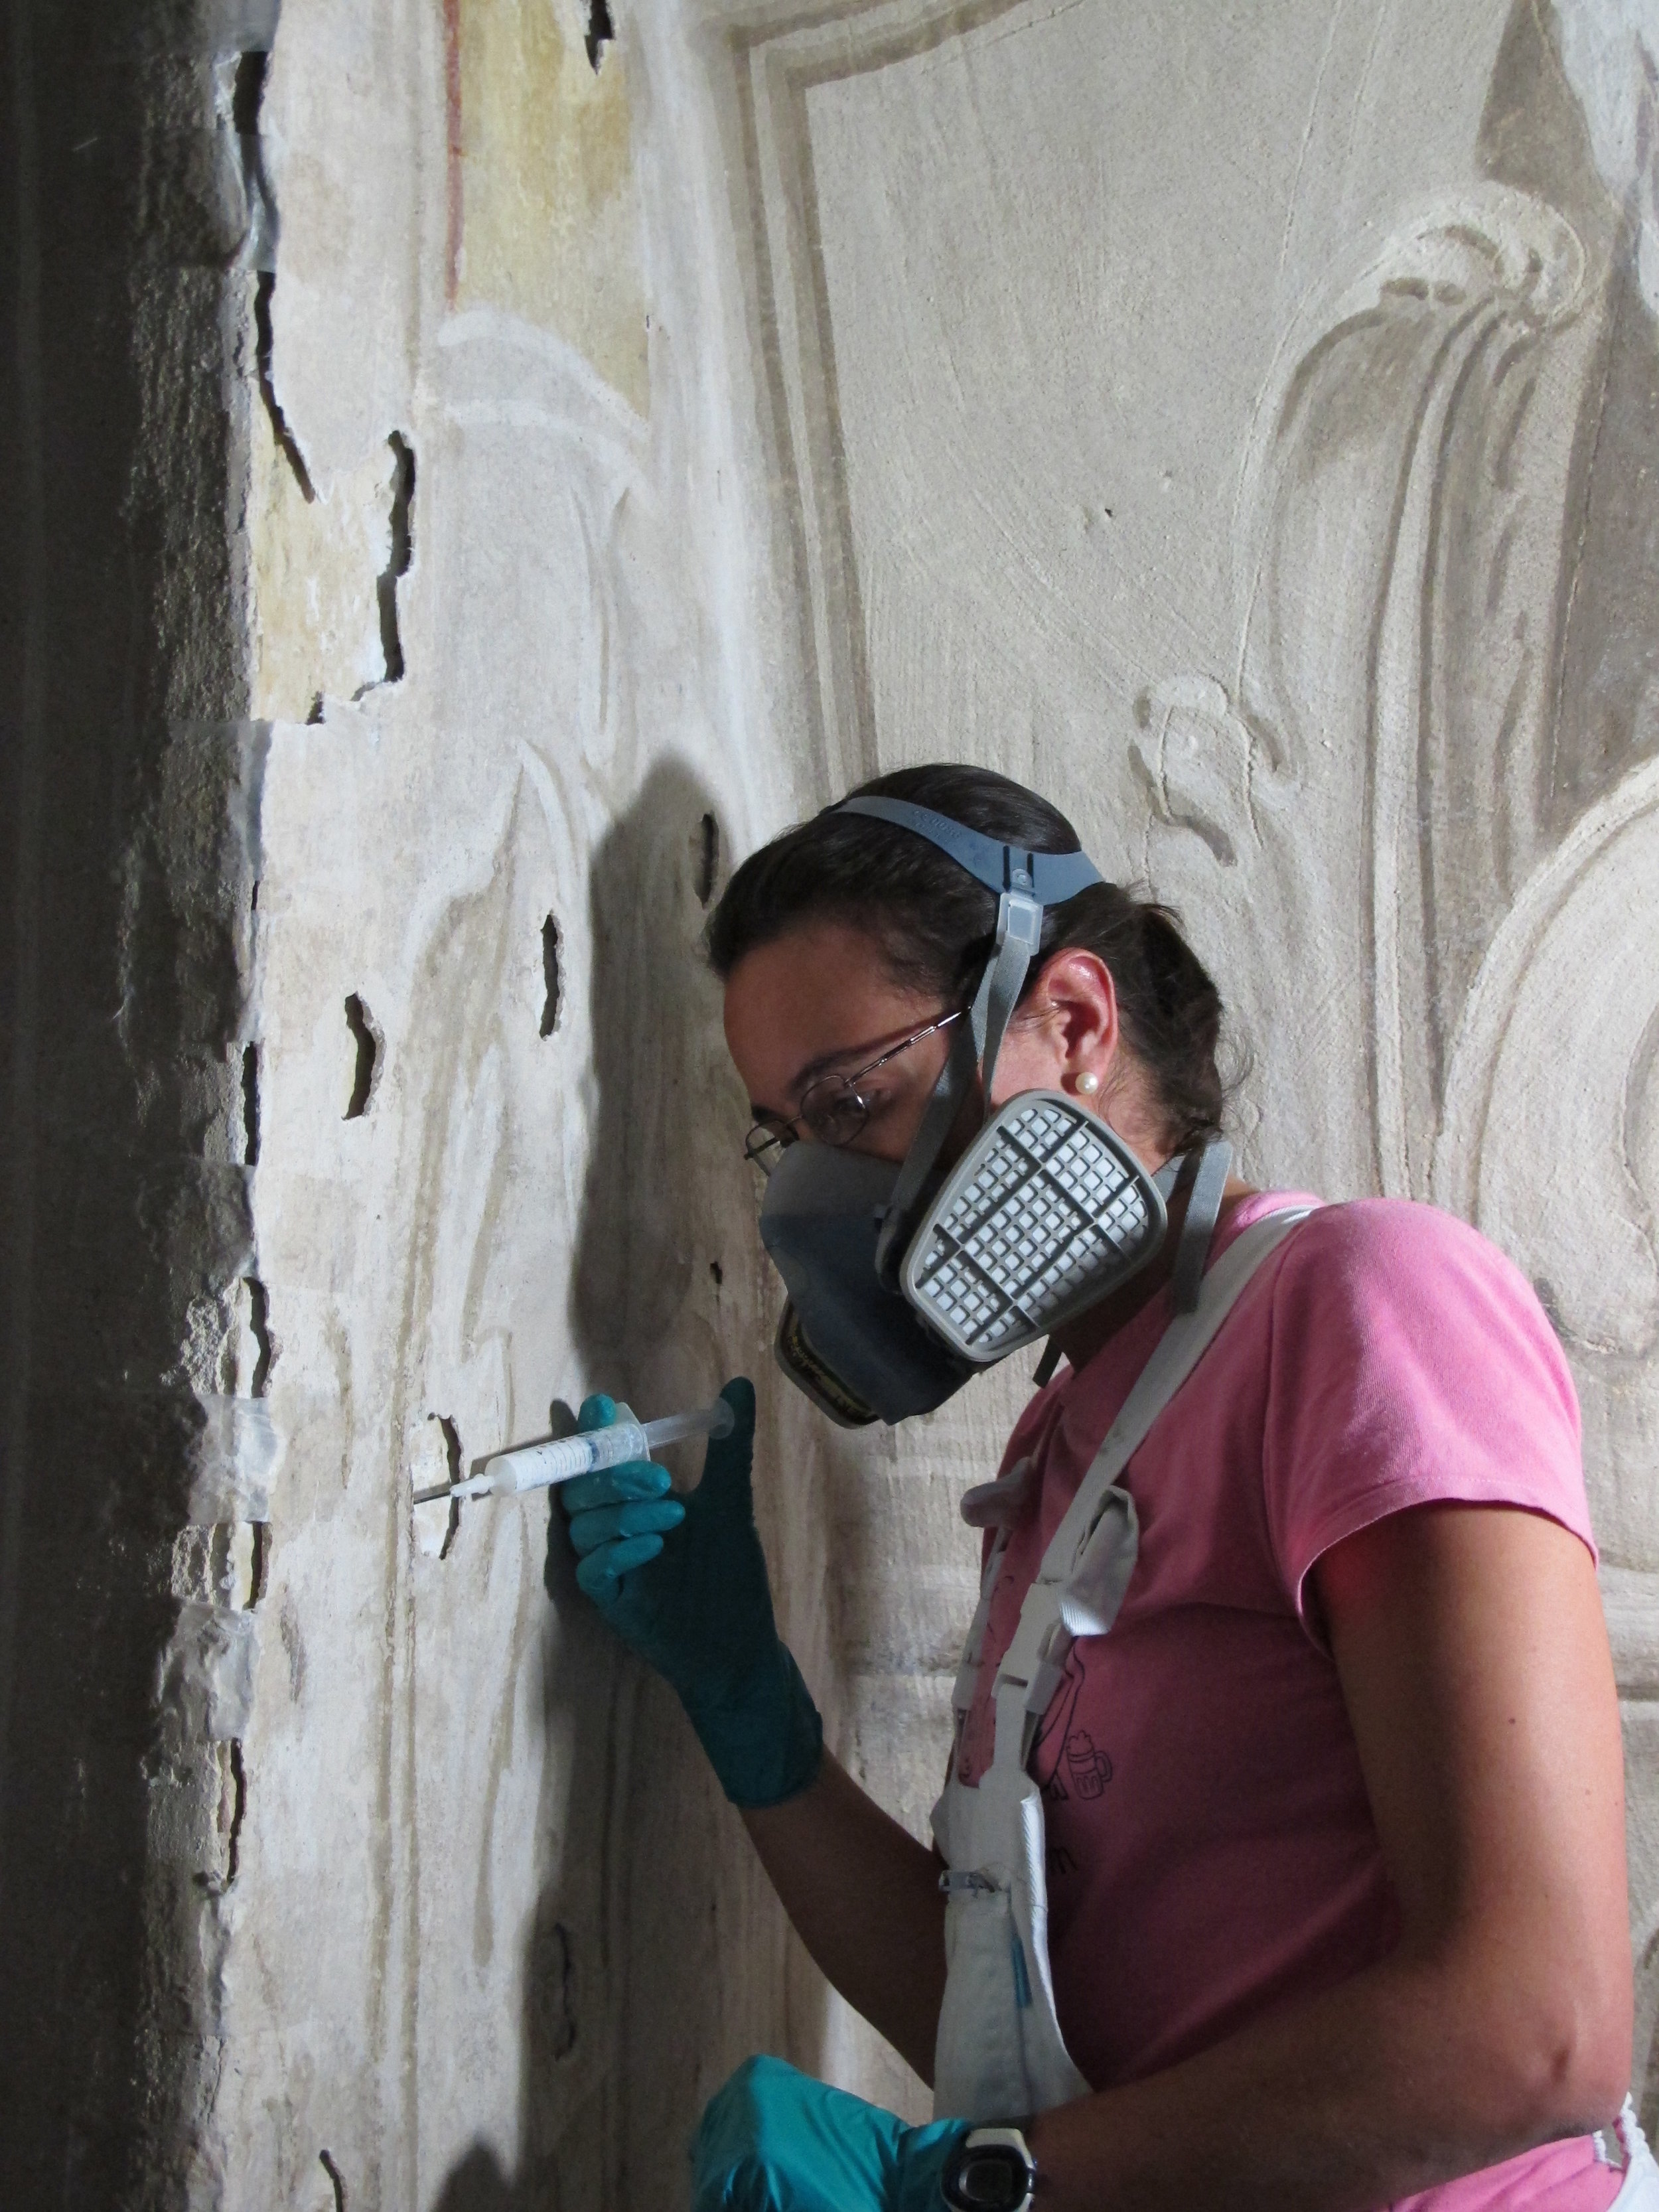  Consolidation of powdering wall paintings.  Image © Courtauld CWPD 